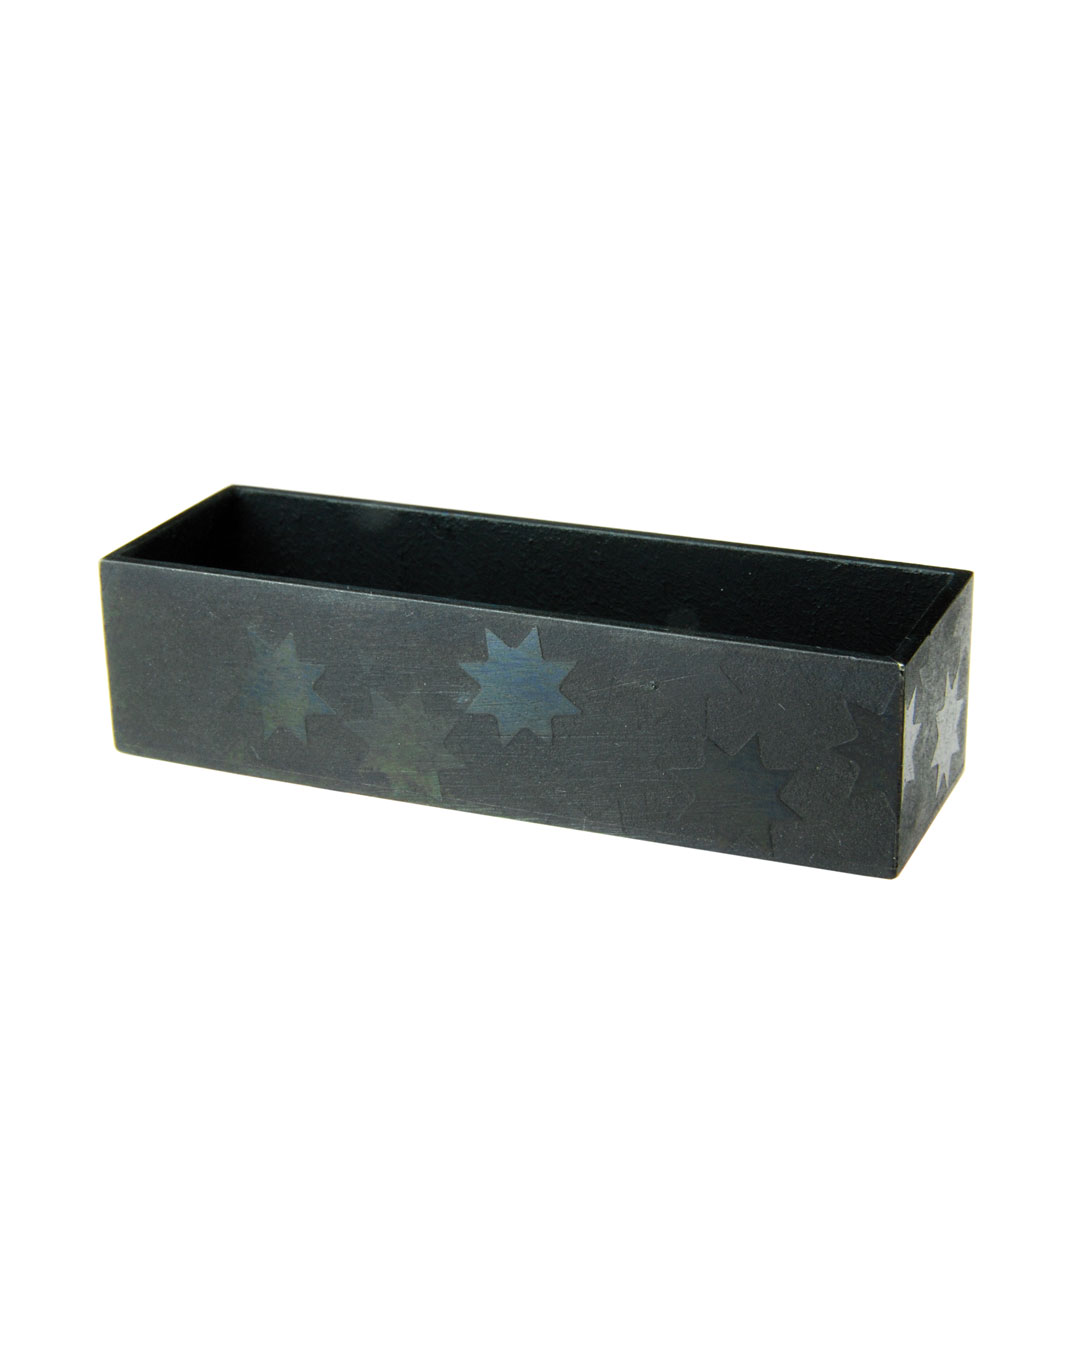 Tore Svensson, Box, 2009, brooch; etched and painted steel, 60 x 20 x 15 mm, €510